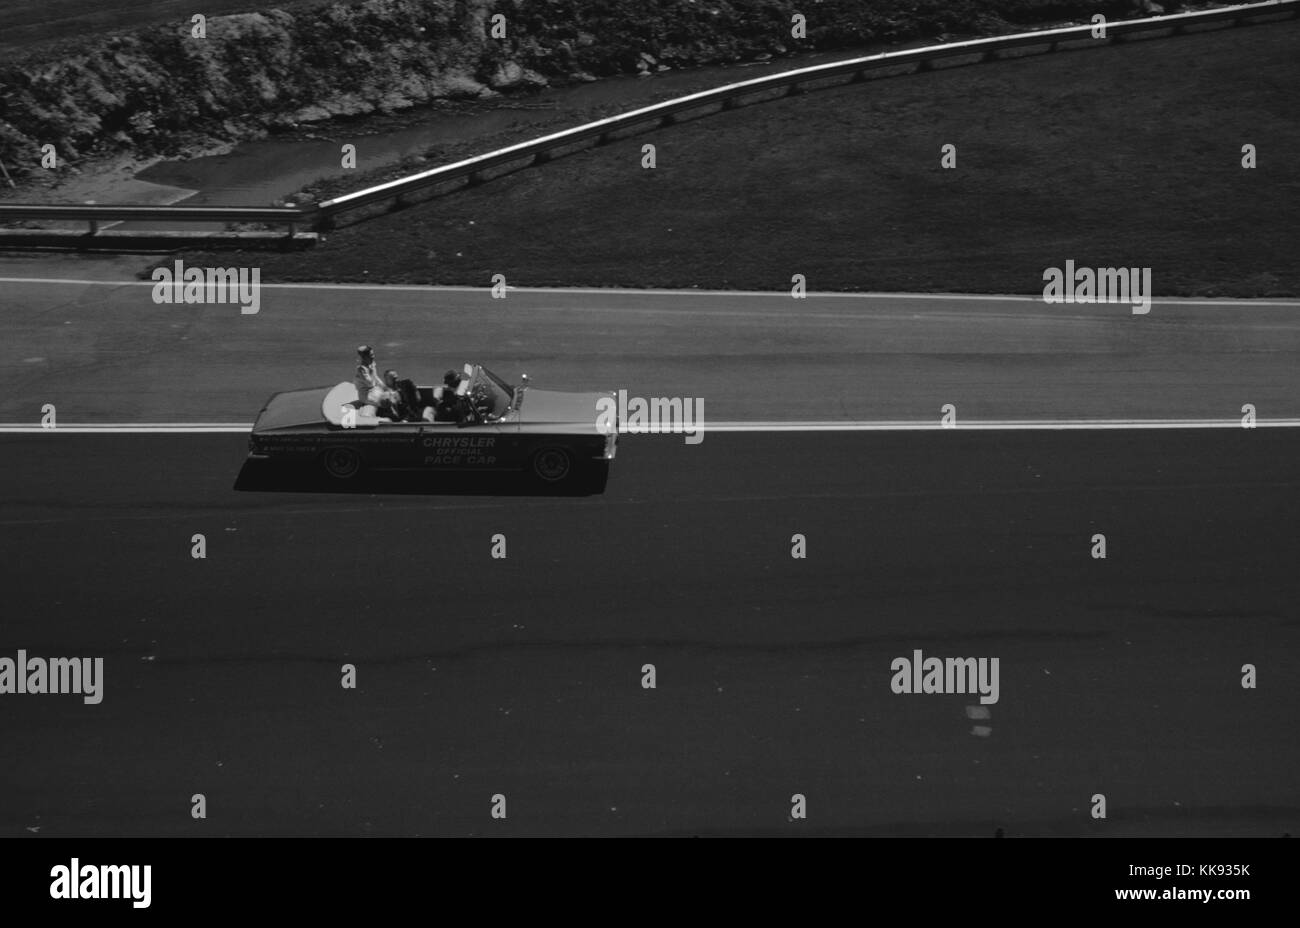 Chrysler 300 pace car being driven by race car driver Sam Hanks during a qualifying lap for the Indianapolis 500 race at Indianapolis Motor Speedway, Indianapolis, Indiana, May 30, 1963. Stock Photo